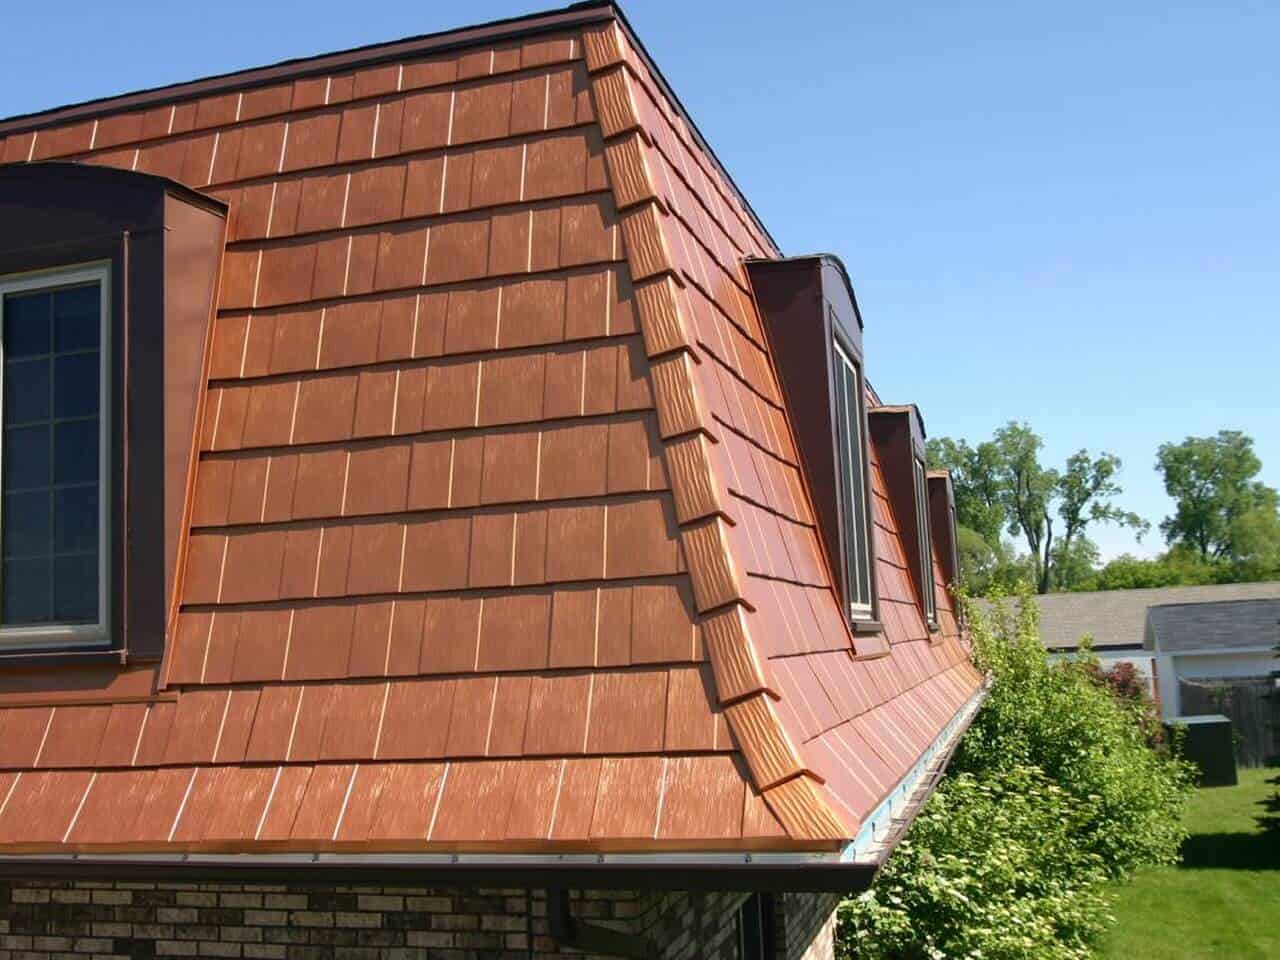 Sugarland TX Metal Roofing Supply